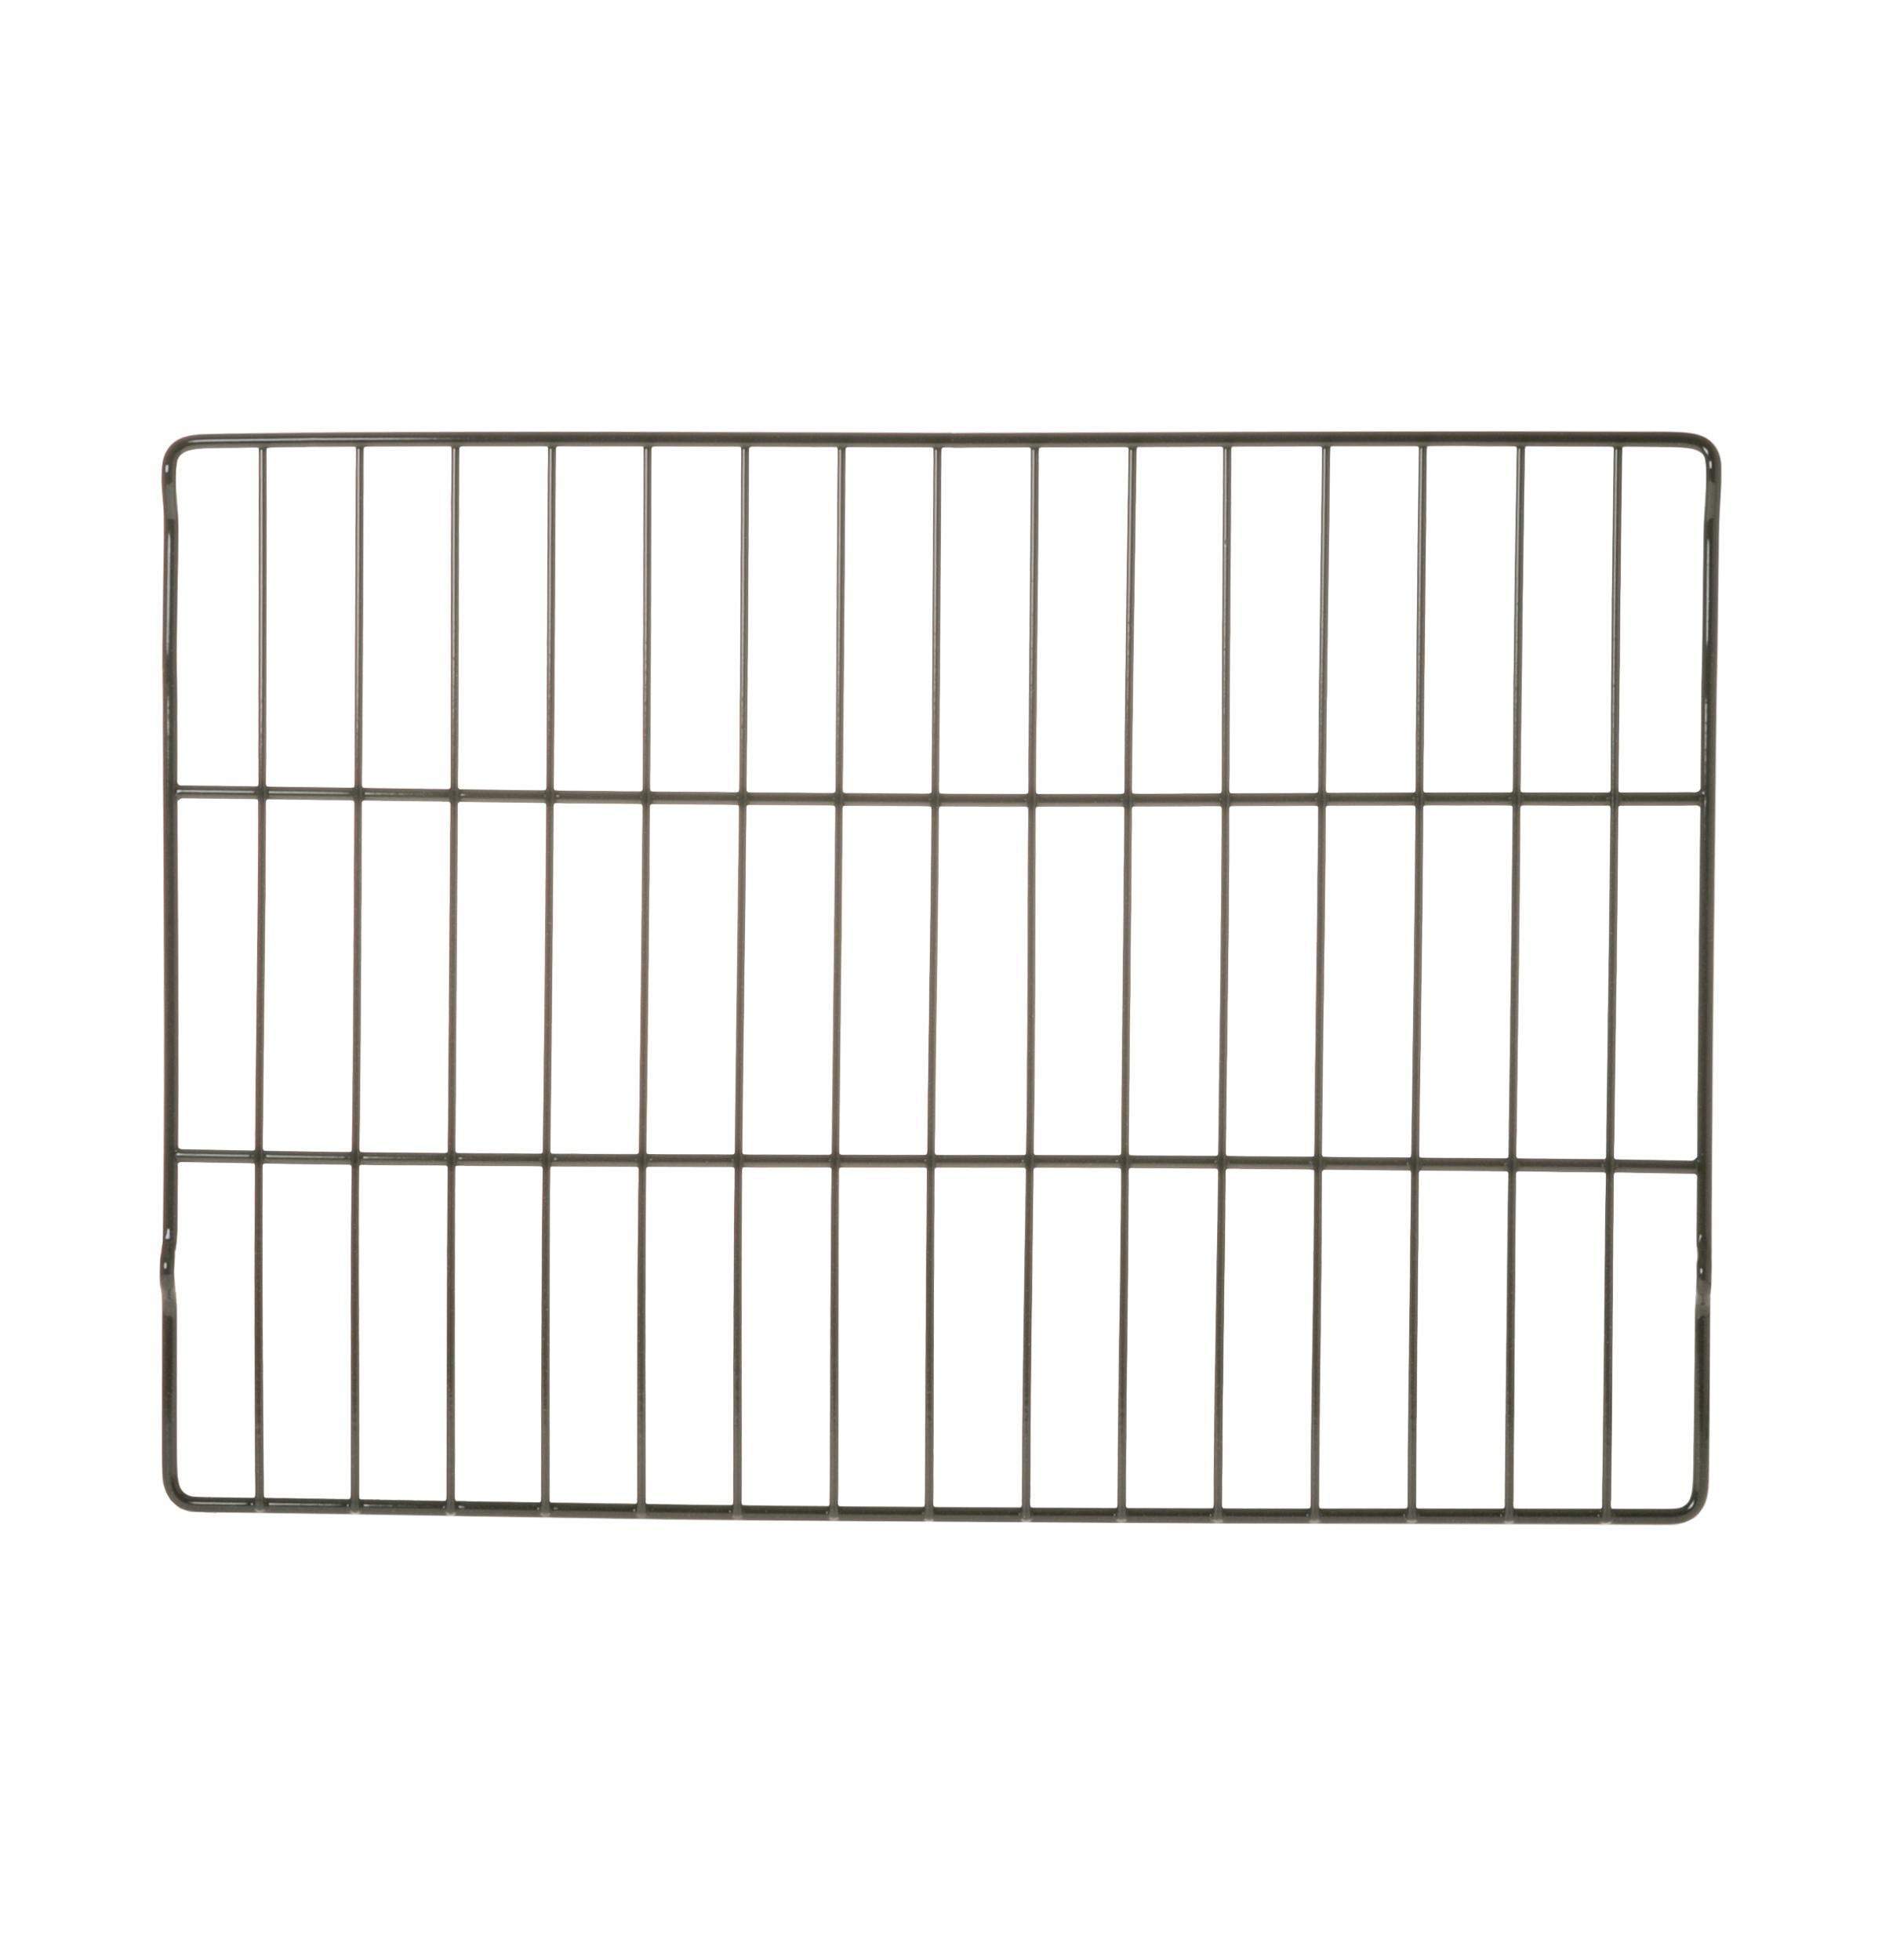 GE® SELF-CLEAN OVEN RACKS (3PK) - FOR ELECTRIC RANGES